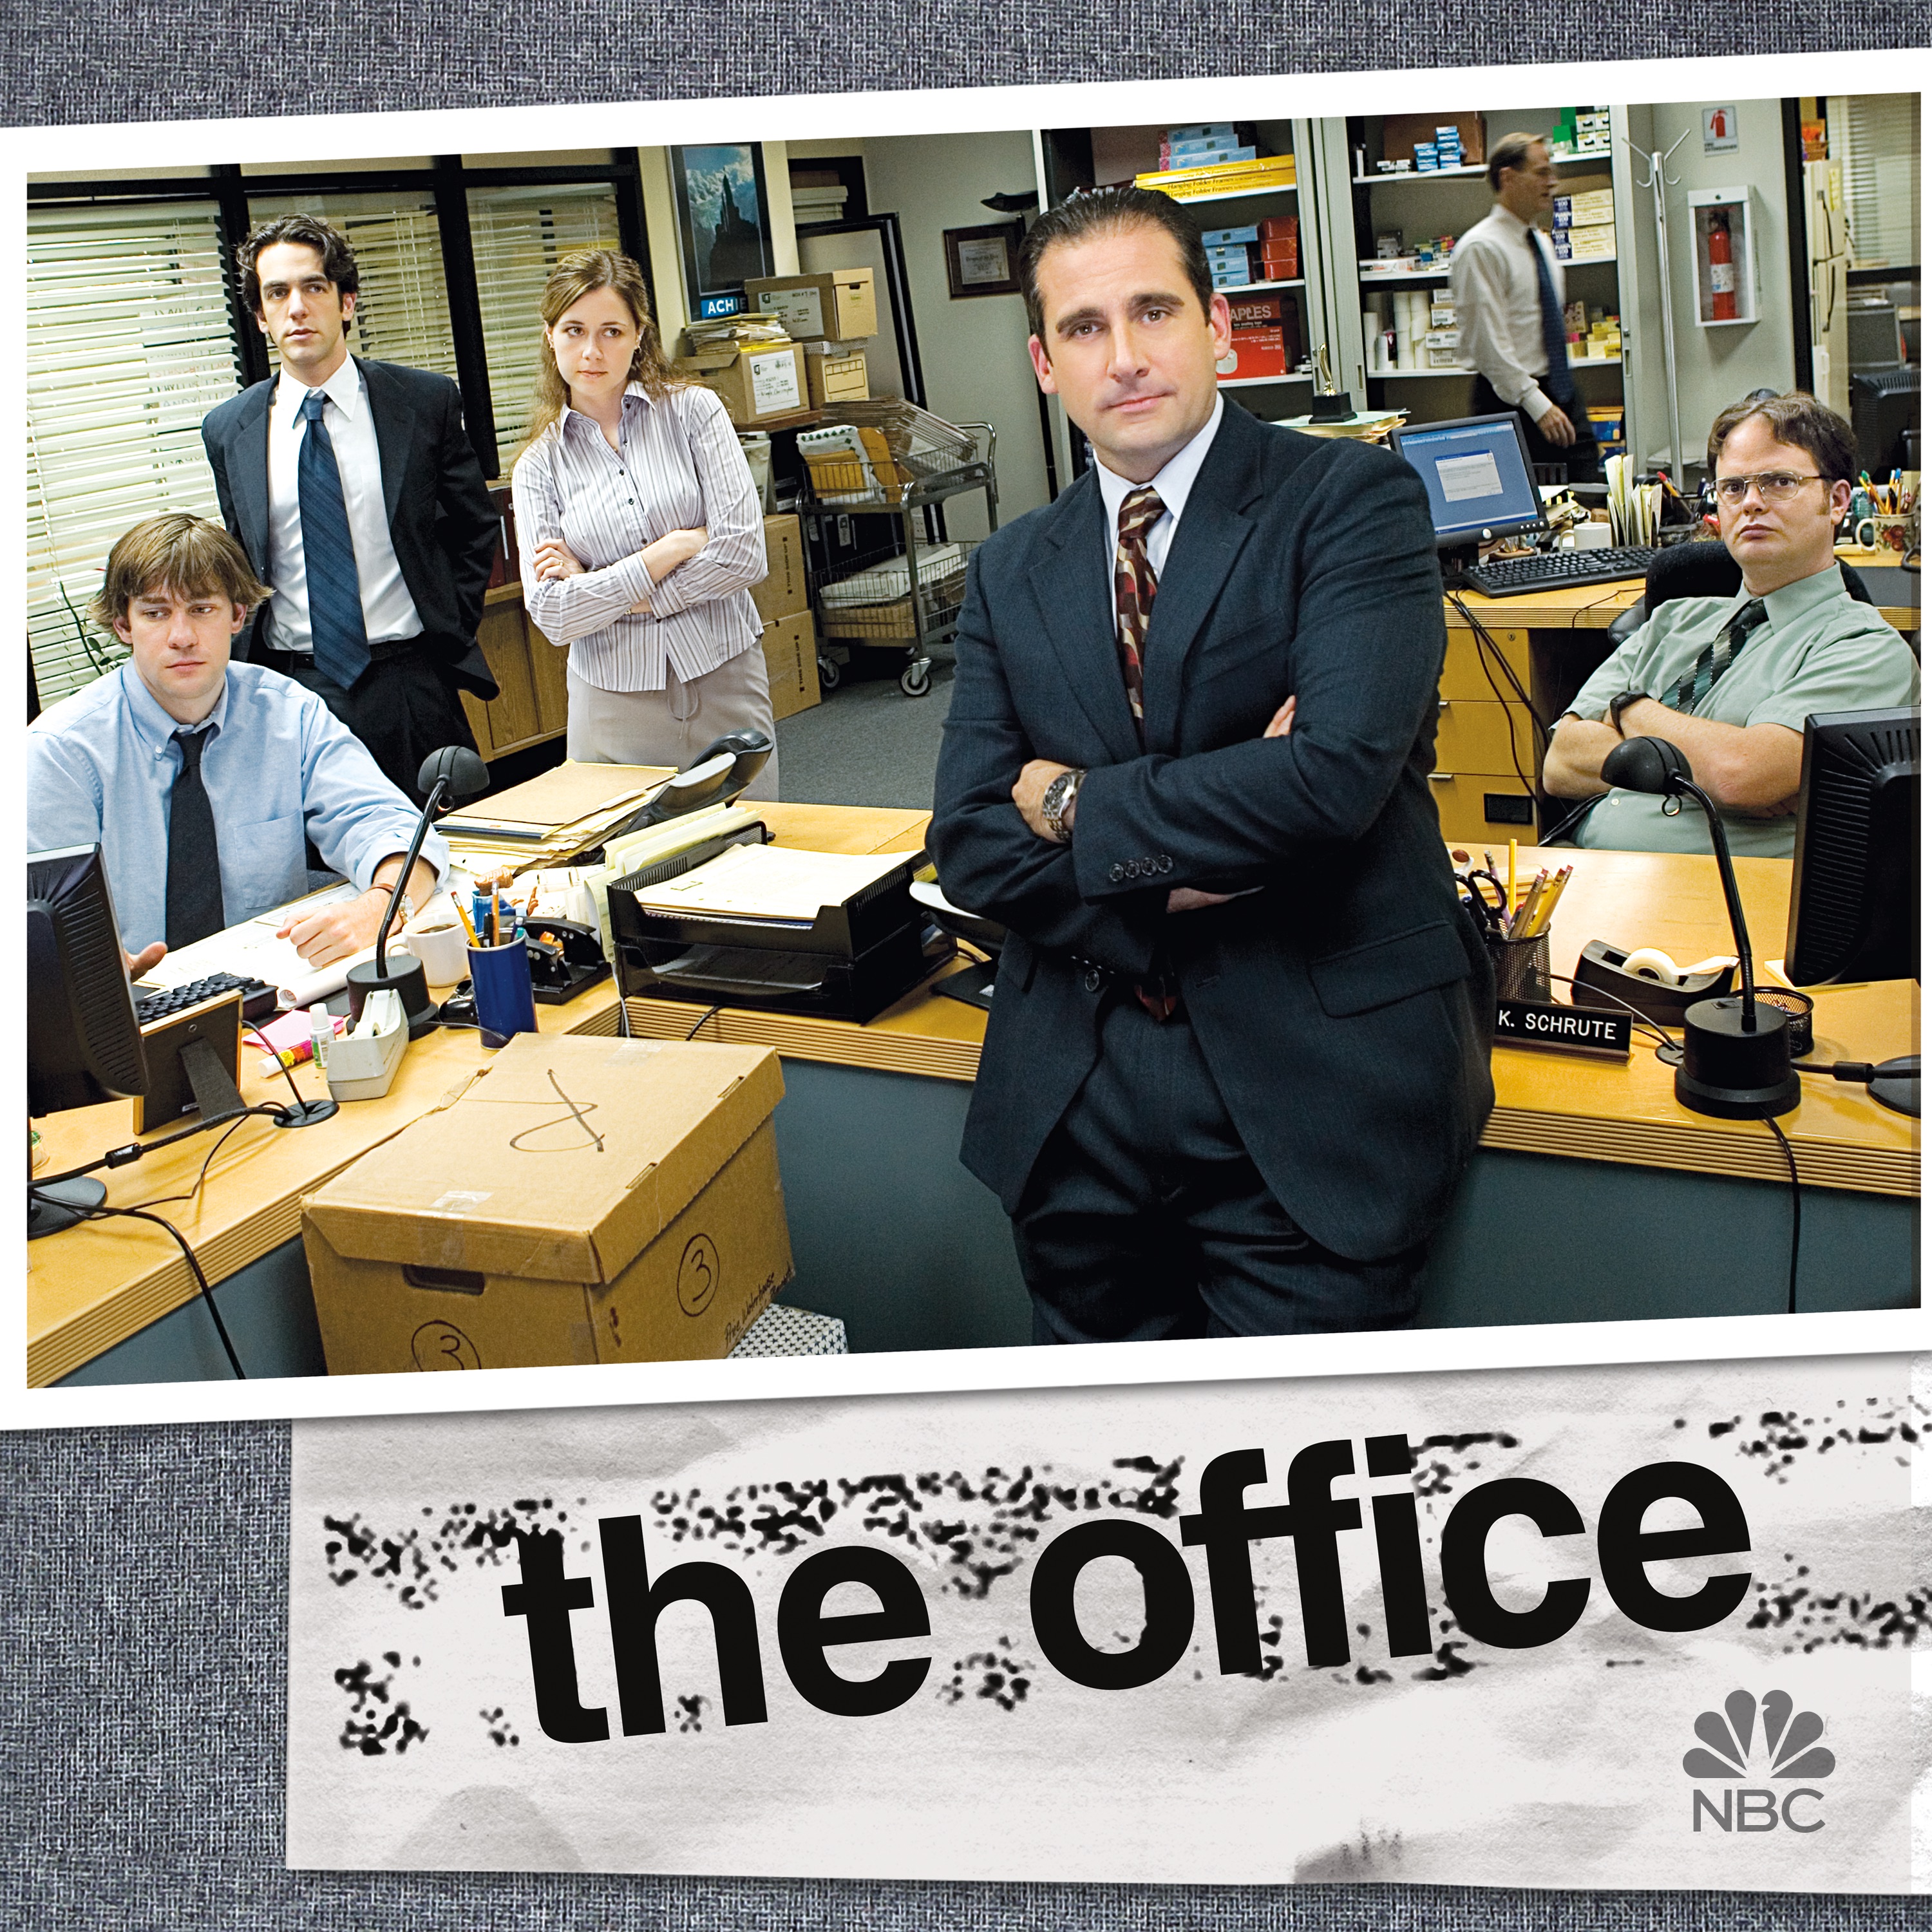 the office series download